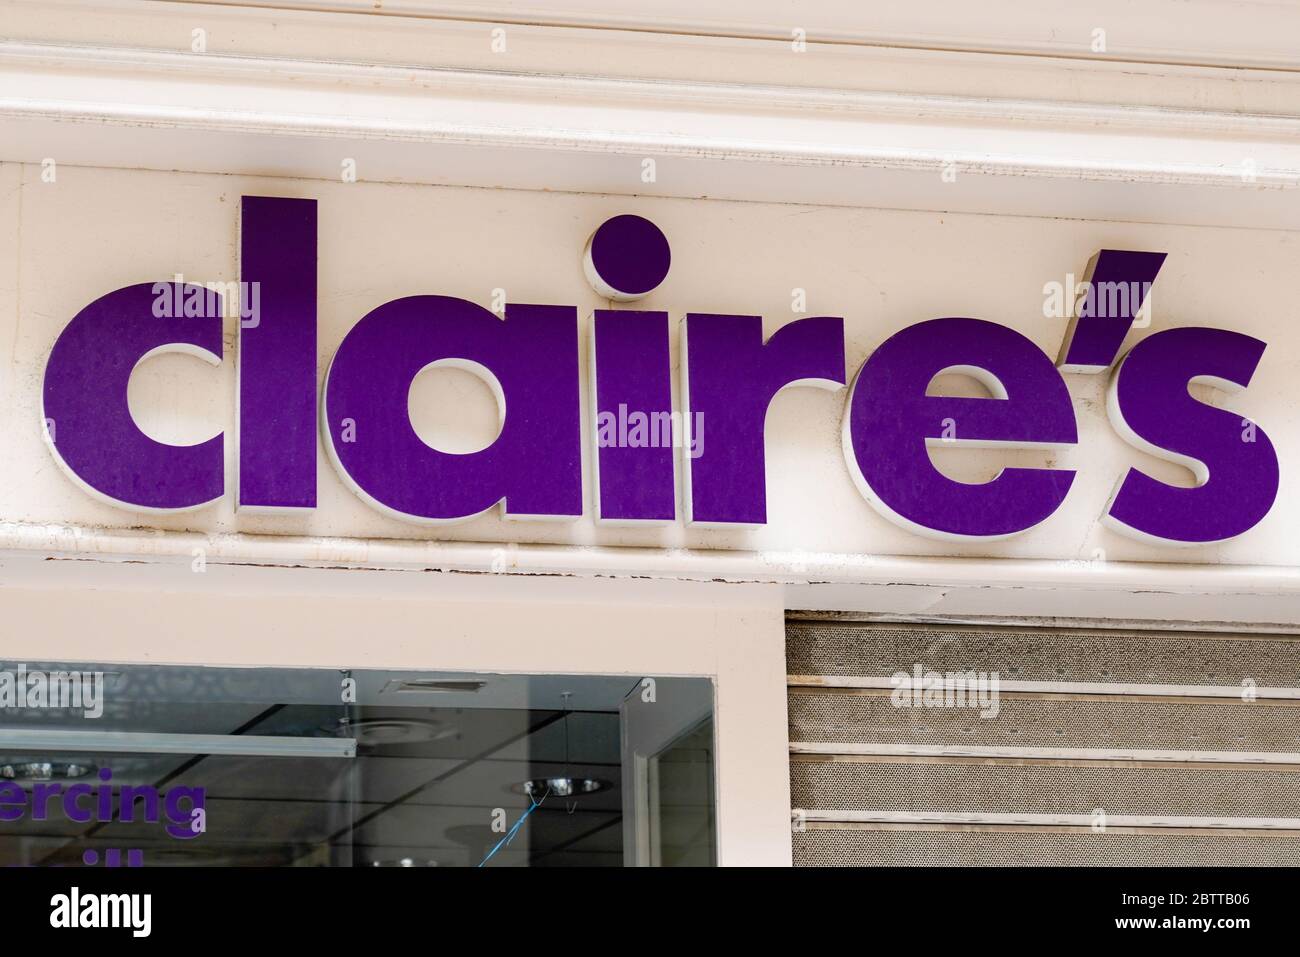 Bordeaux , Aquitaine / France - 05 05 2020 : claire's shop brand logo and sign on the store Stock Photo